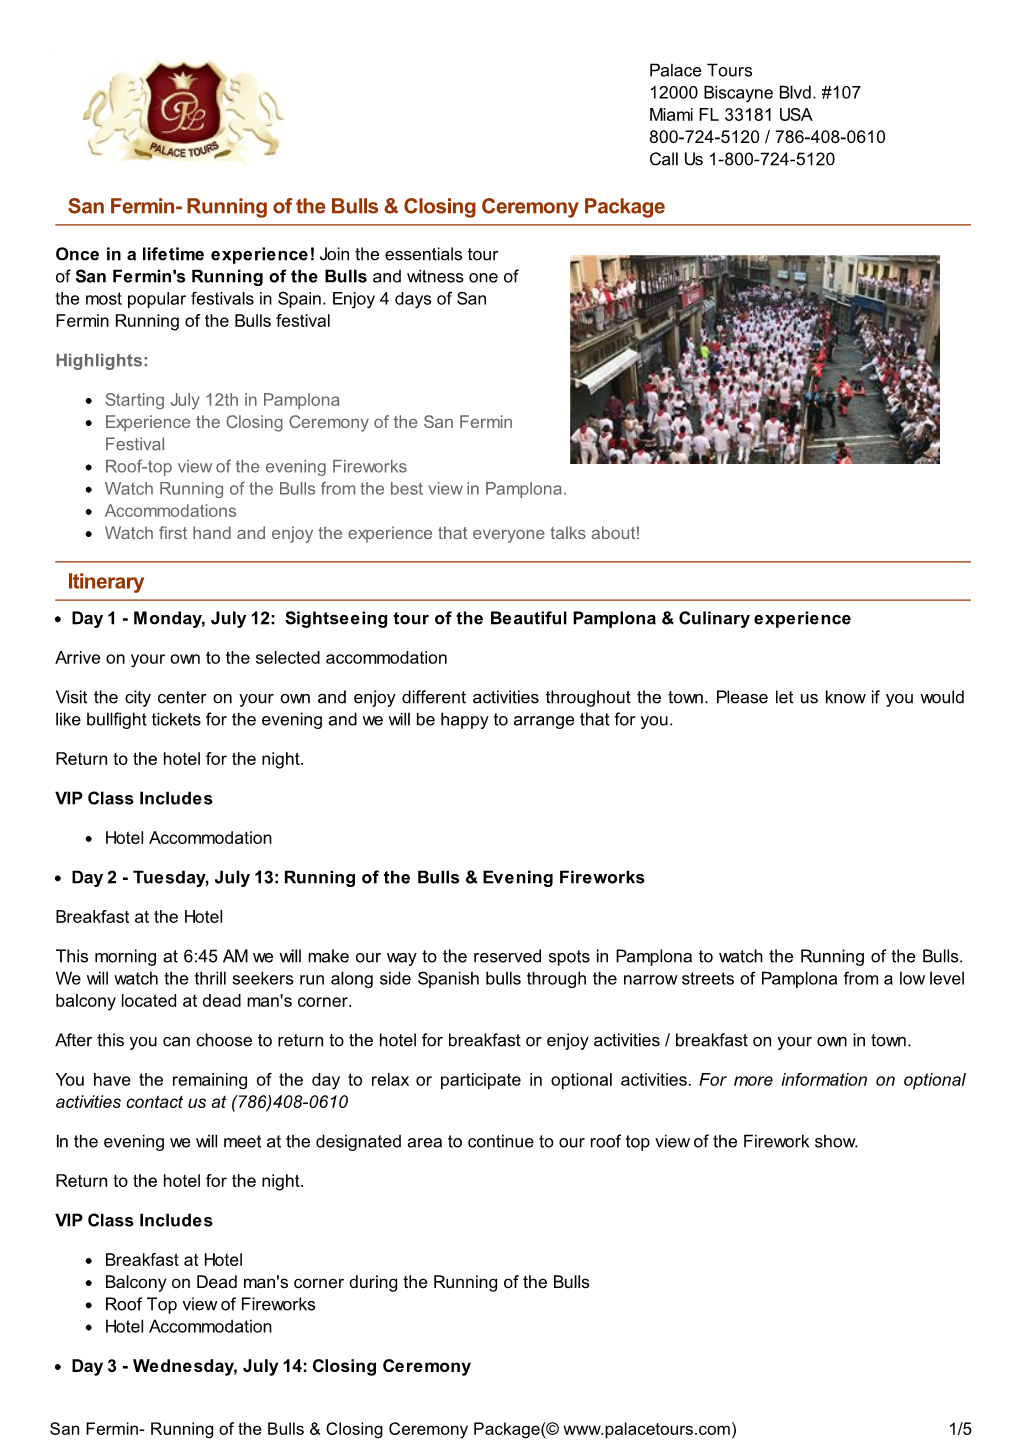 San Fermin- Running of the Bulls & Closing Ceremony Package Itinerary